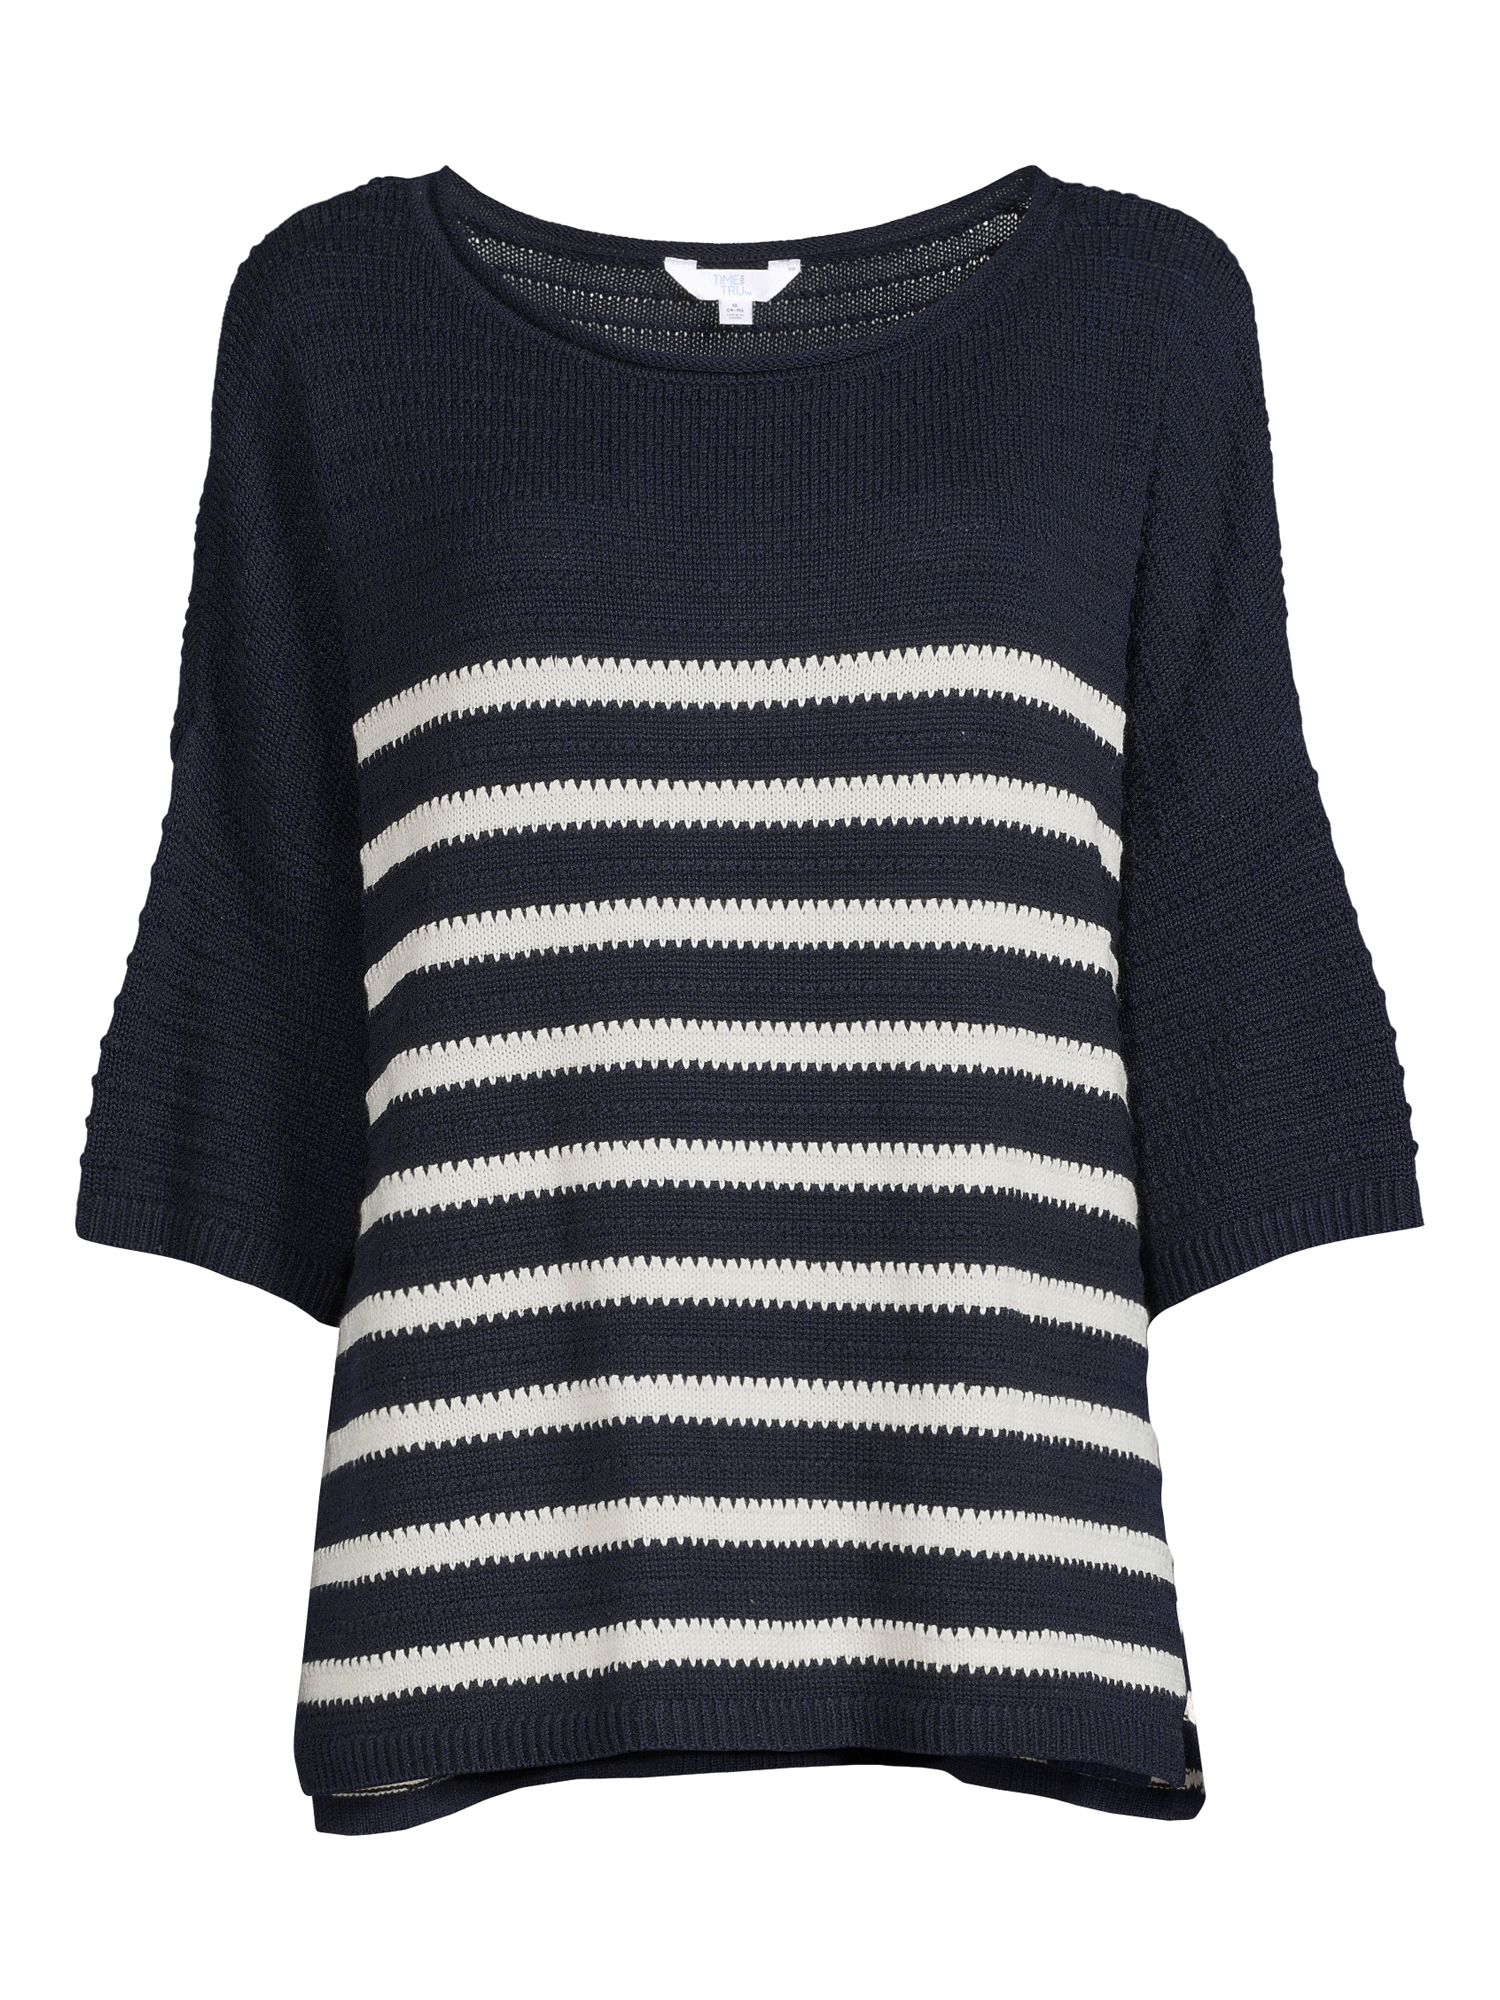 Time and Tru Women’s Boatneck Sweater - image 4 of 5